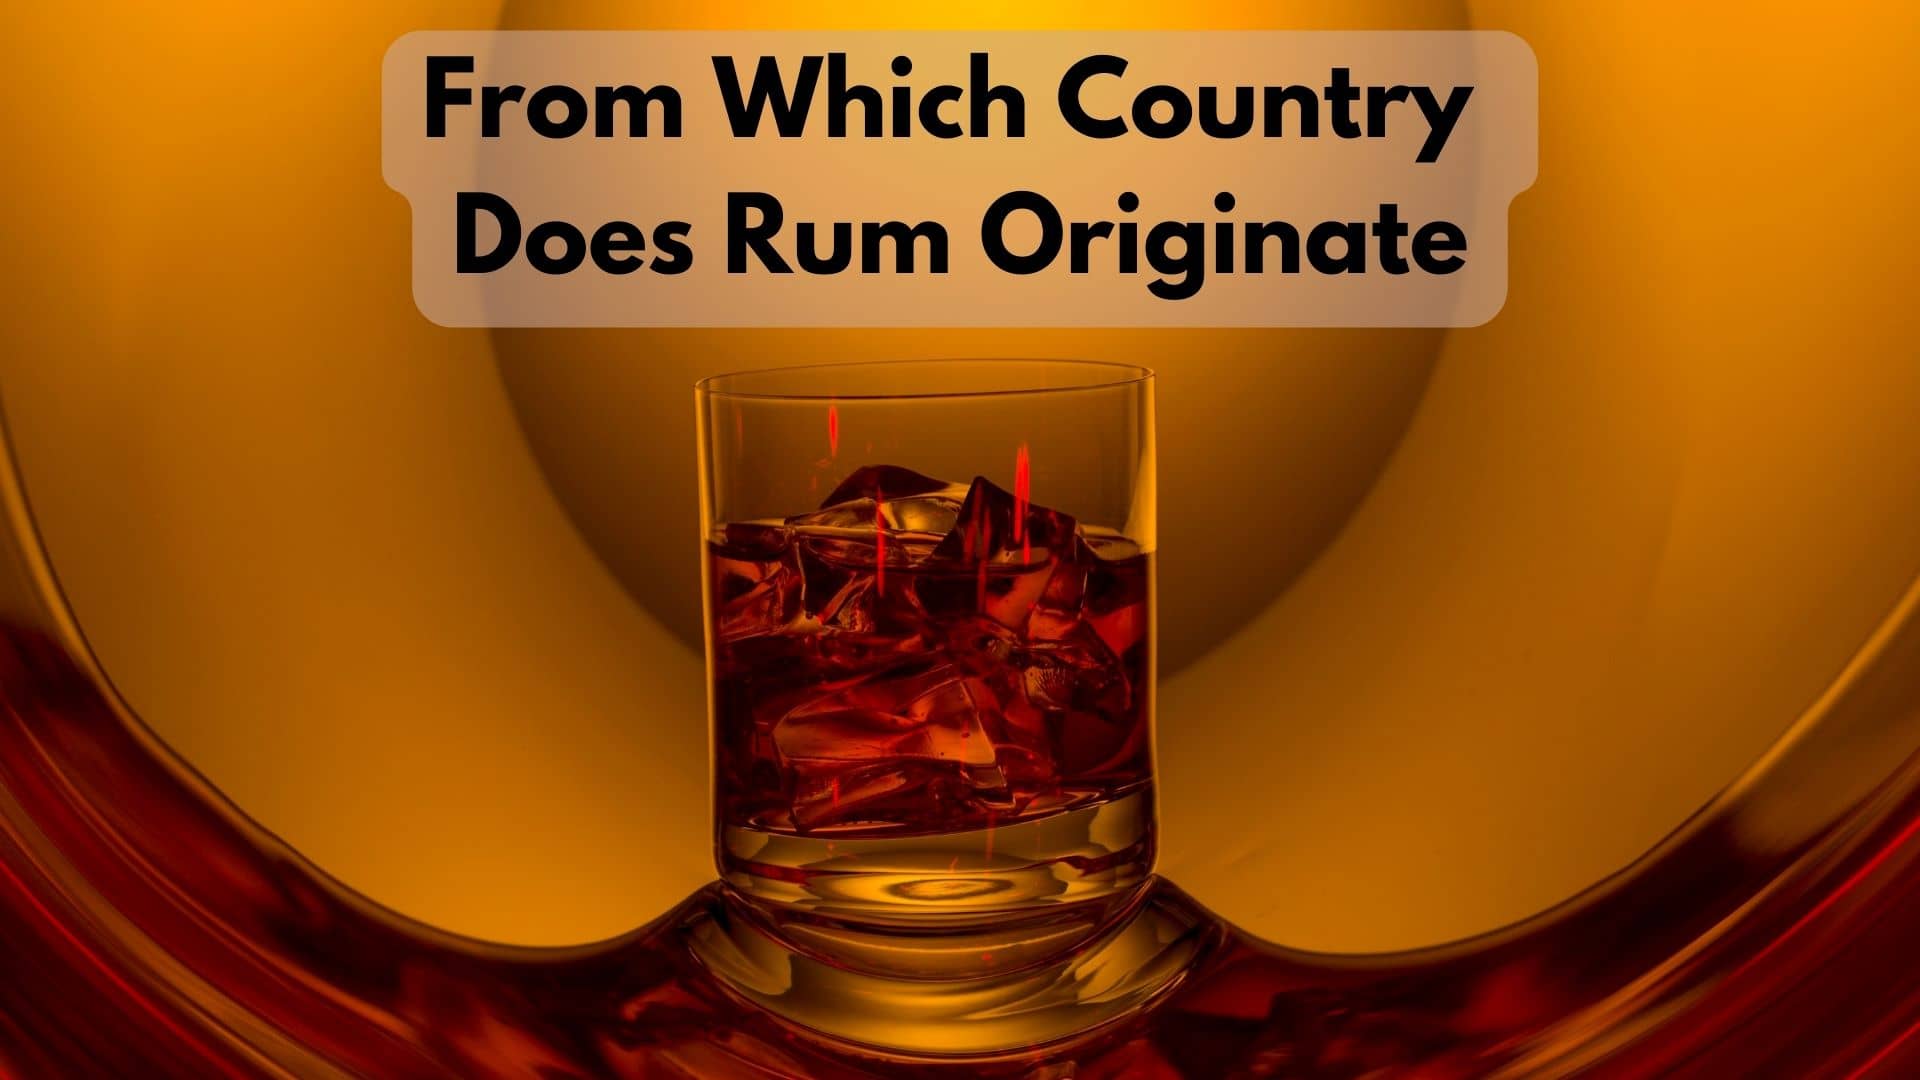 From Which Country Does Rum Originate?